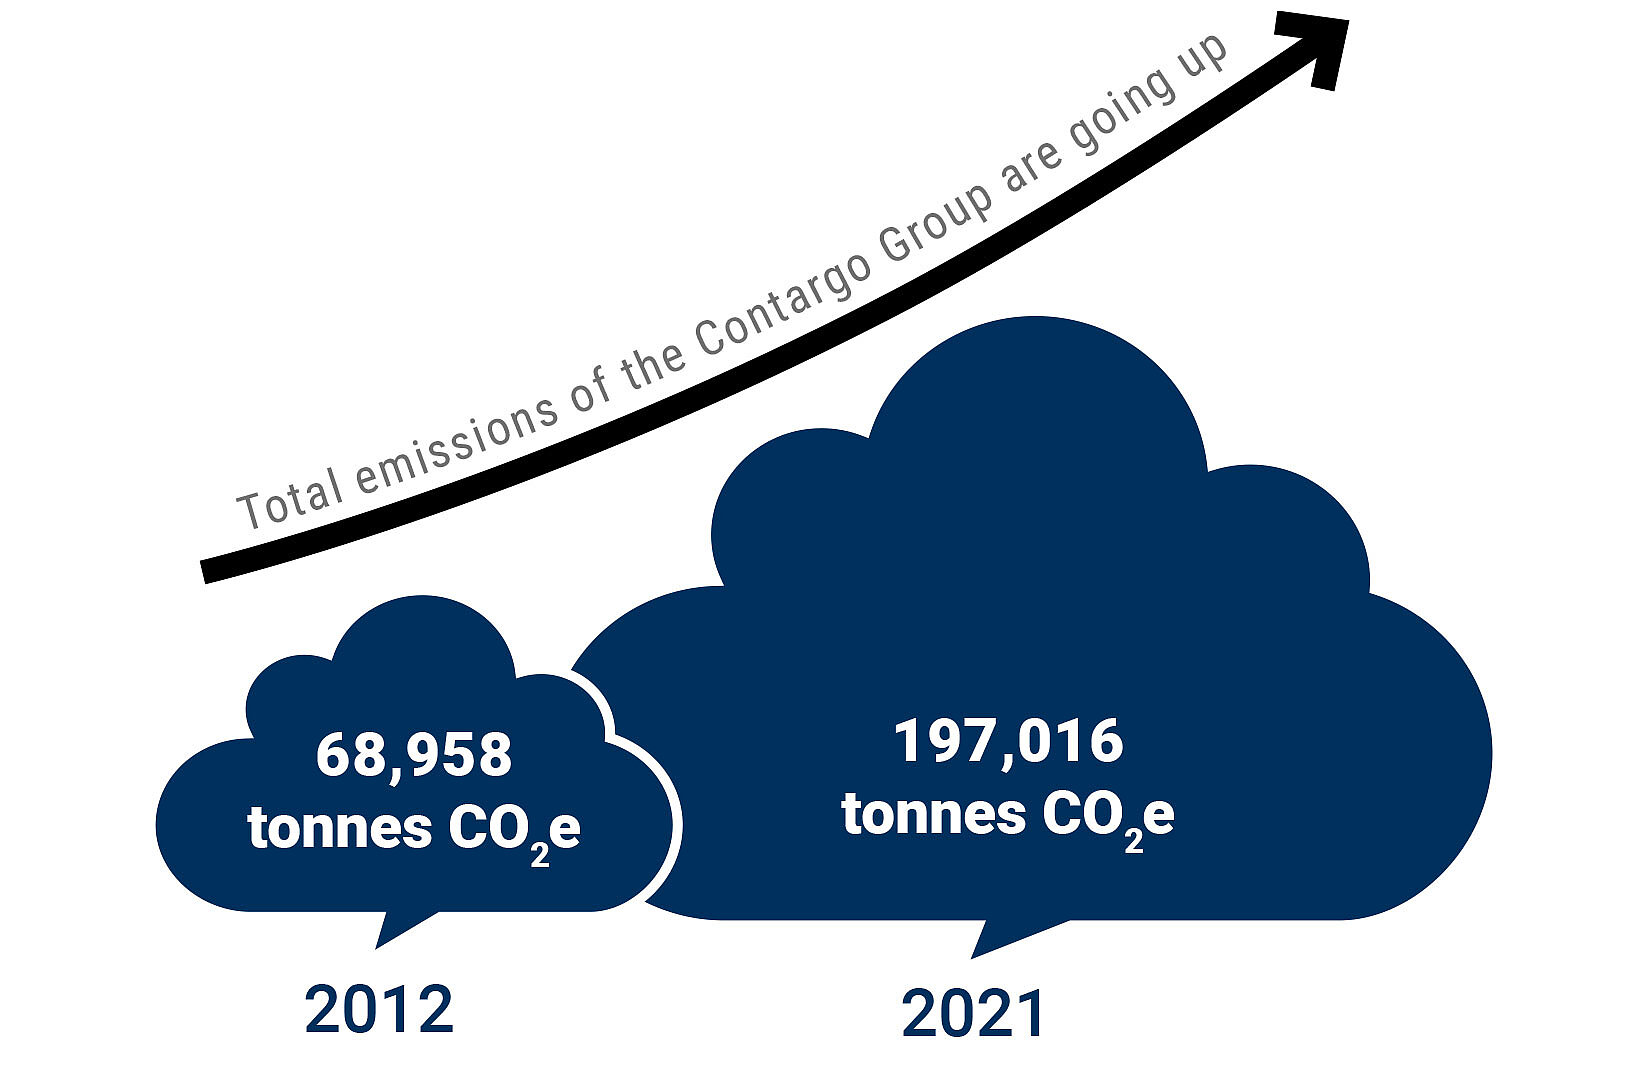 Graphic - more emissions due to more containers